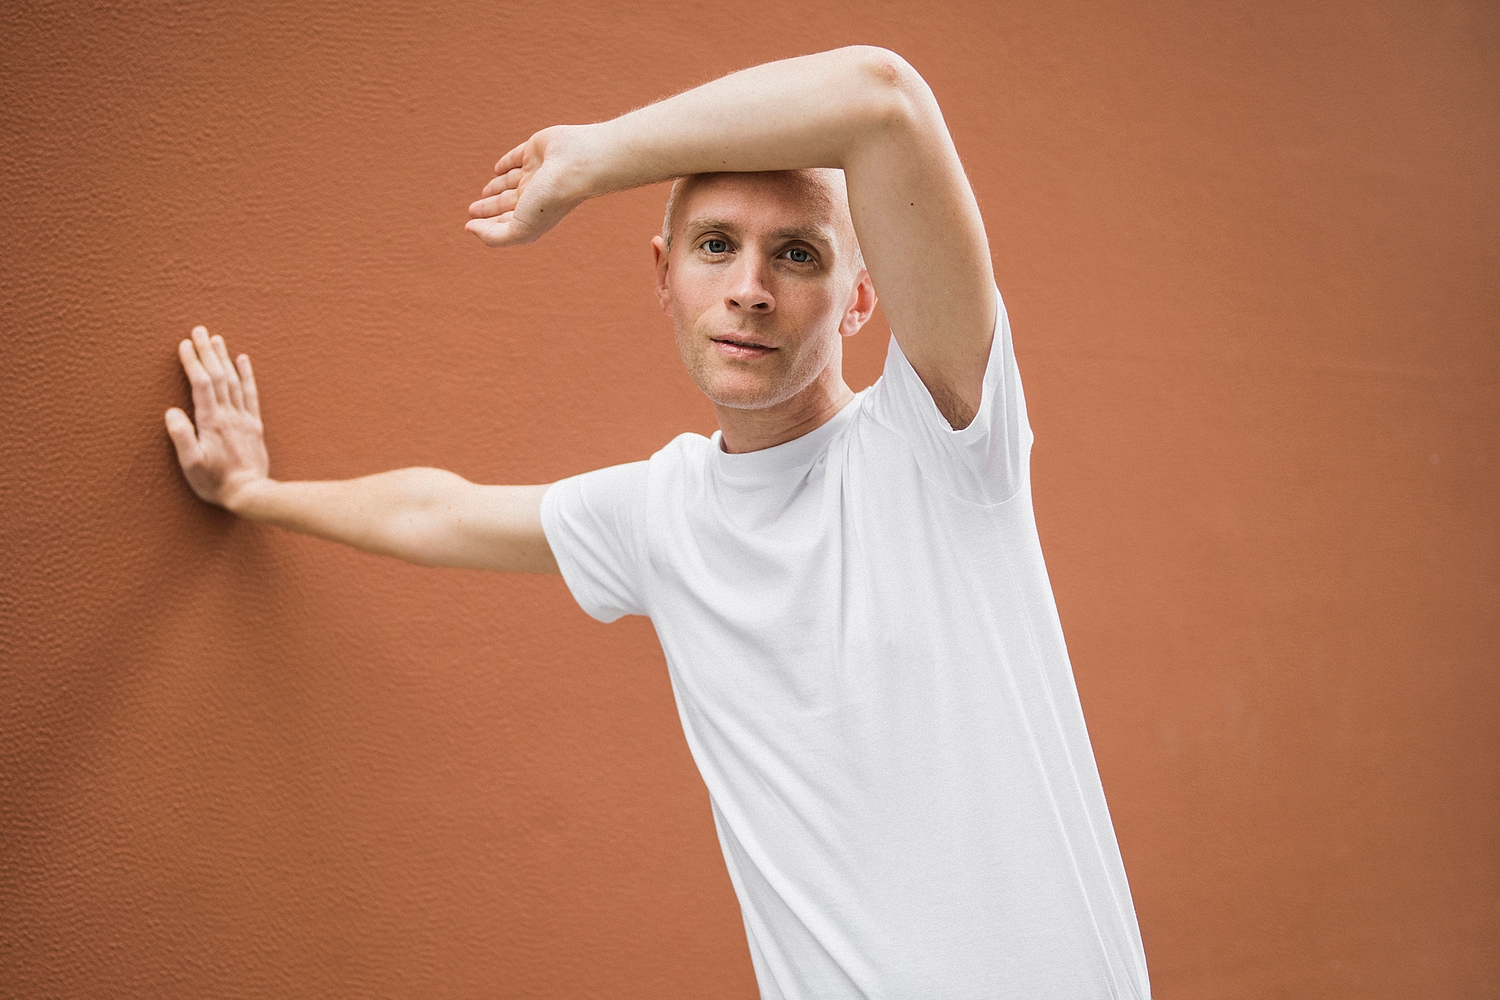 Jens Lekman hates plates in the ‘What’s That Perfume You Wear?’ video